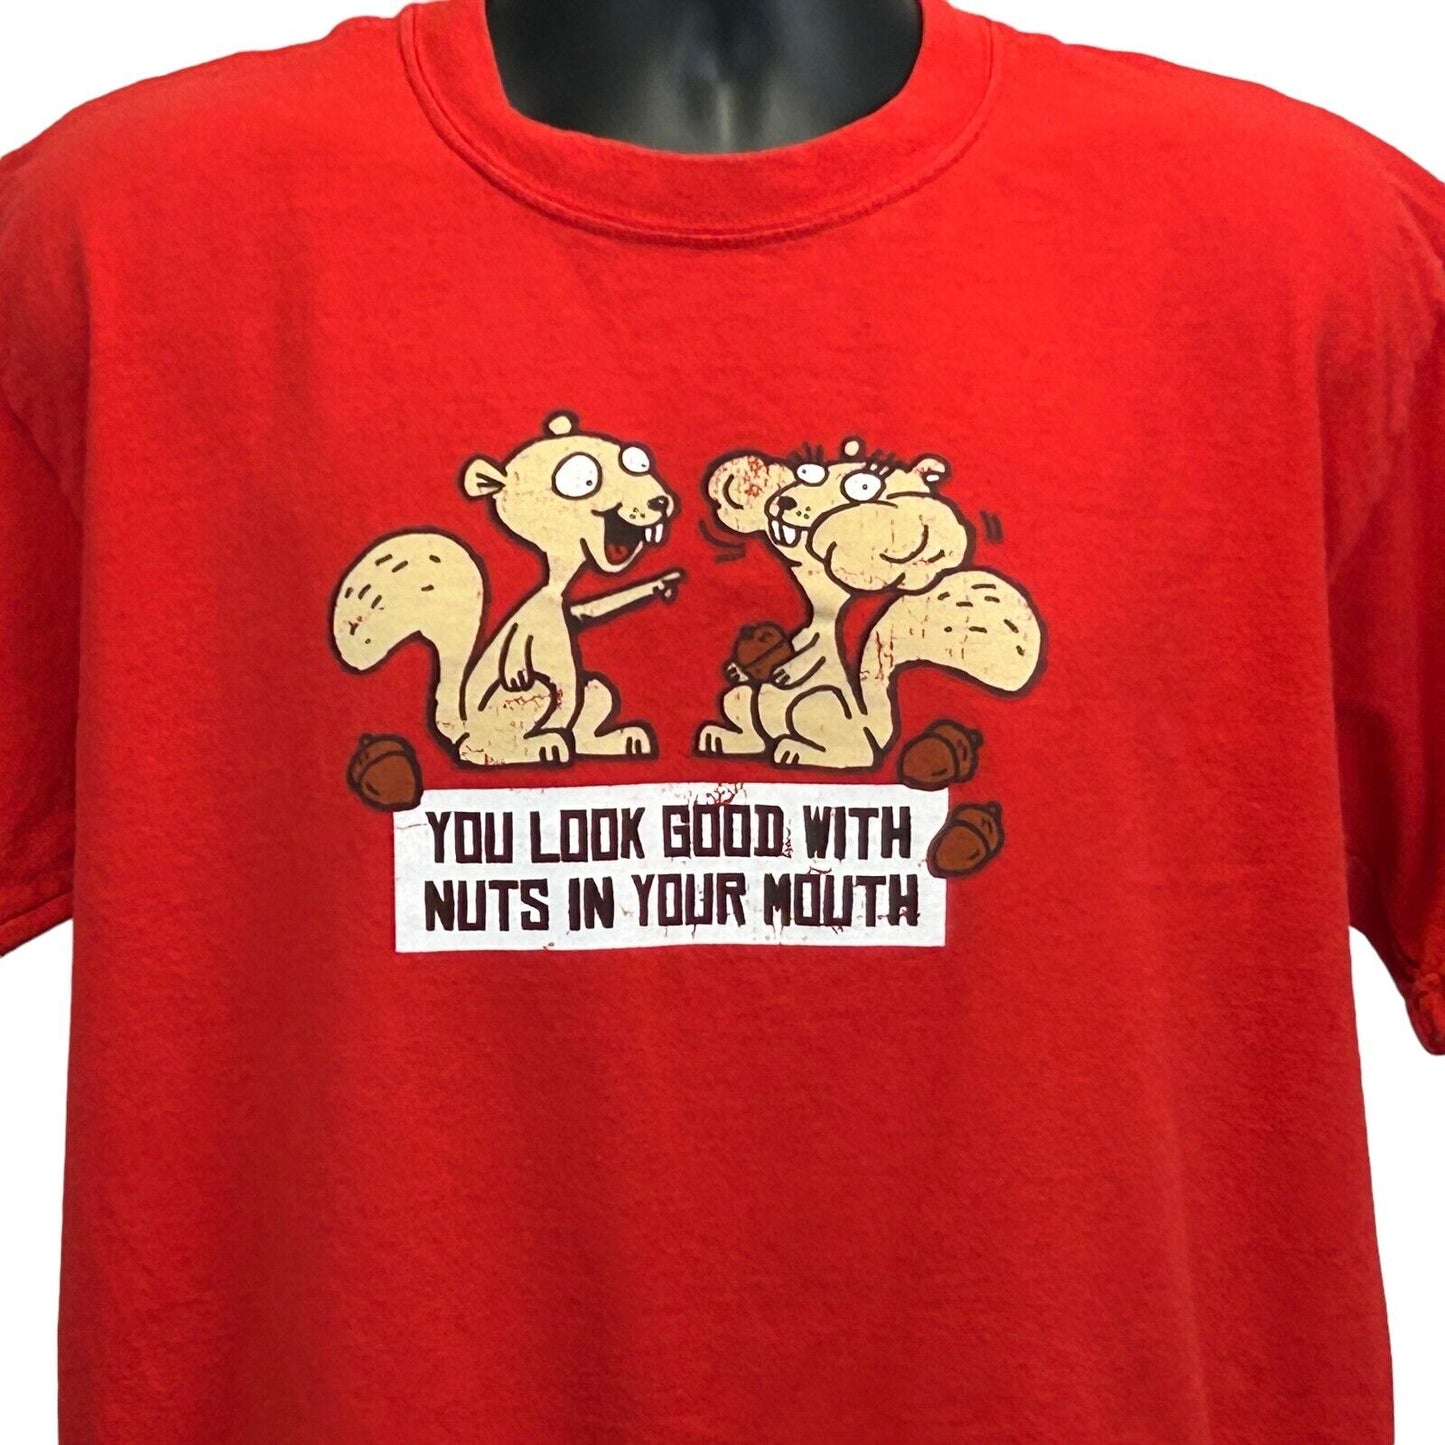 You Look Good With Nuts In Your Mouth T Shirt Large Vintage Y2Ks Funny Mens Red